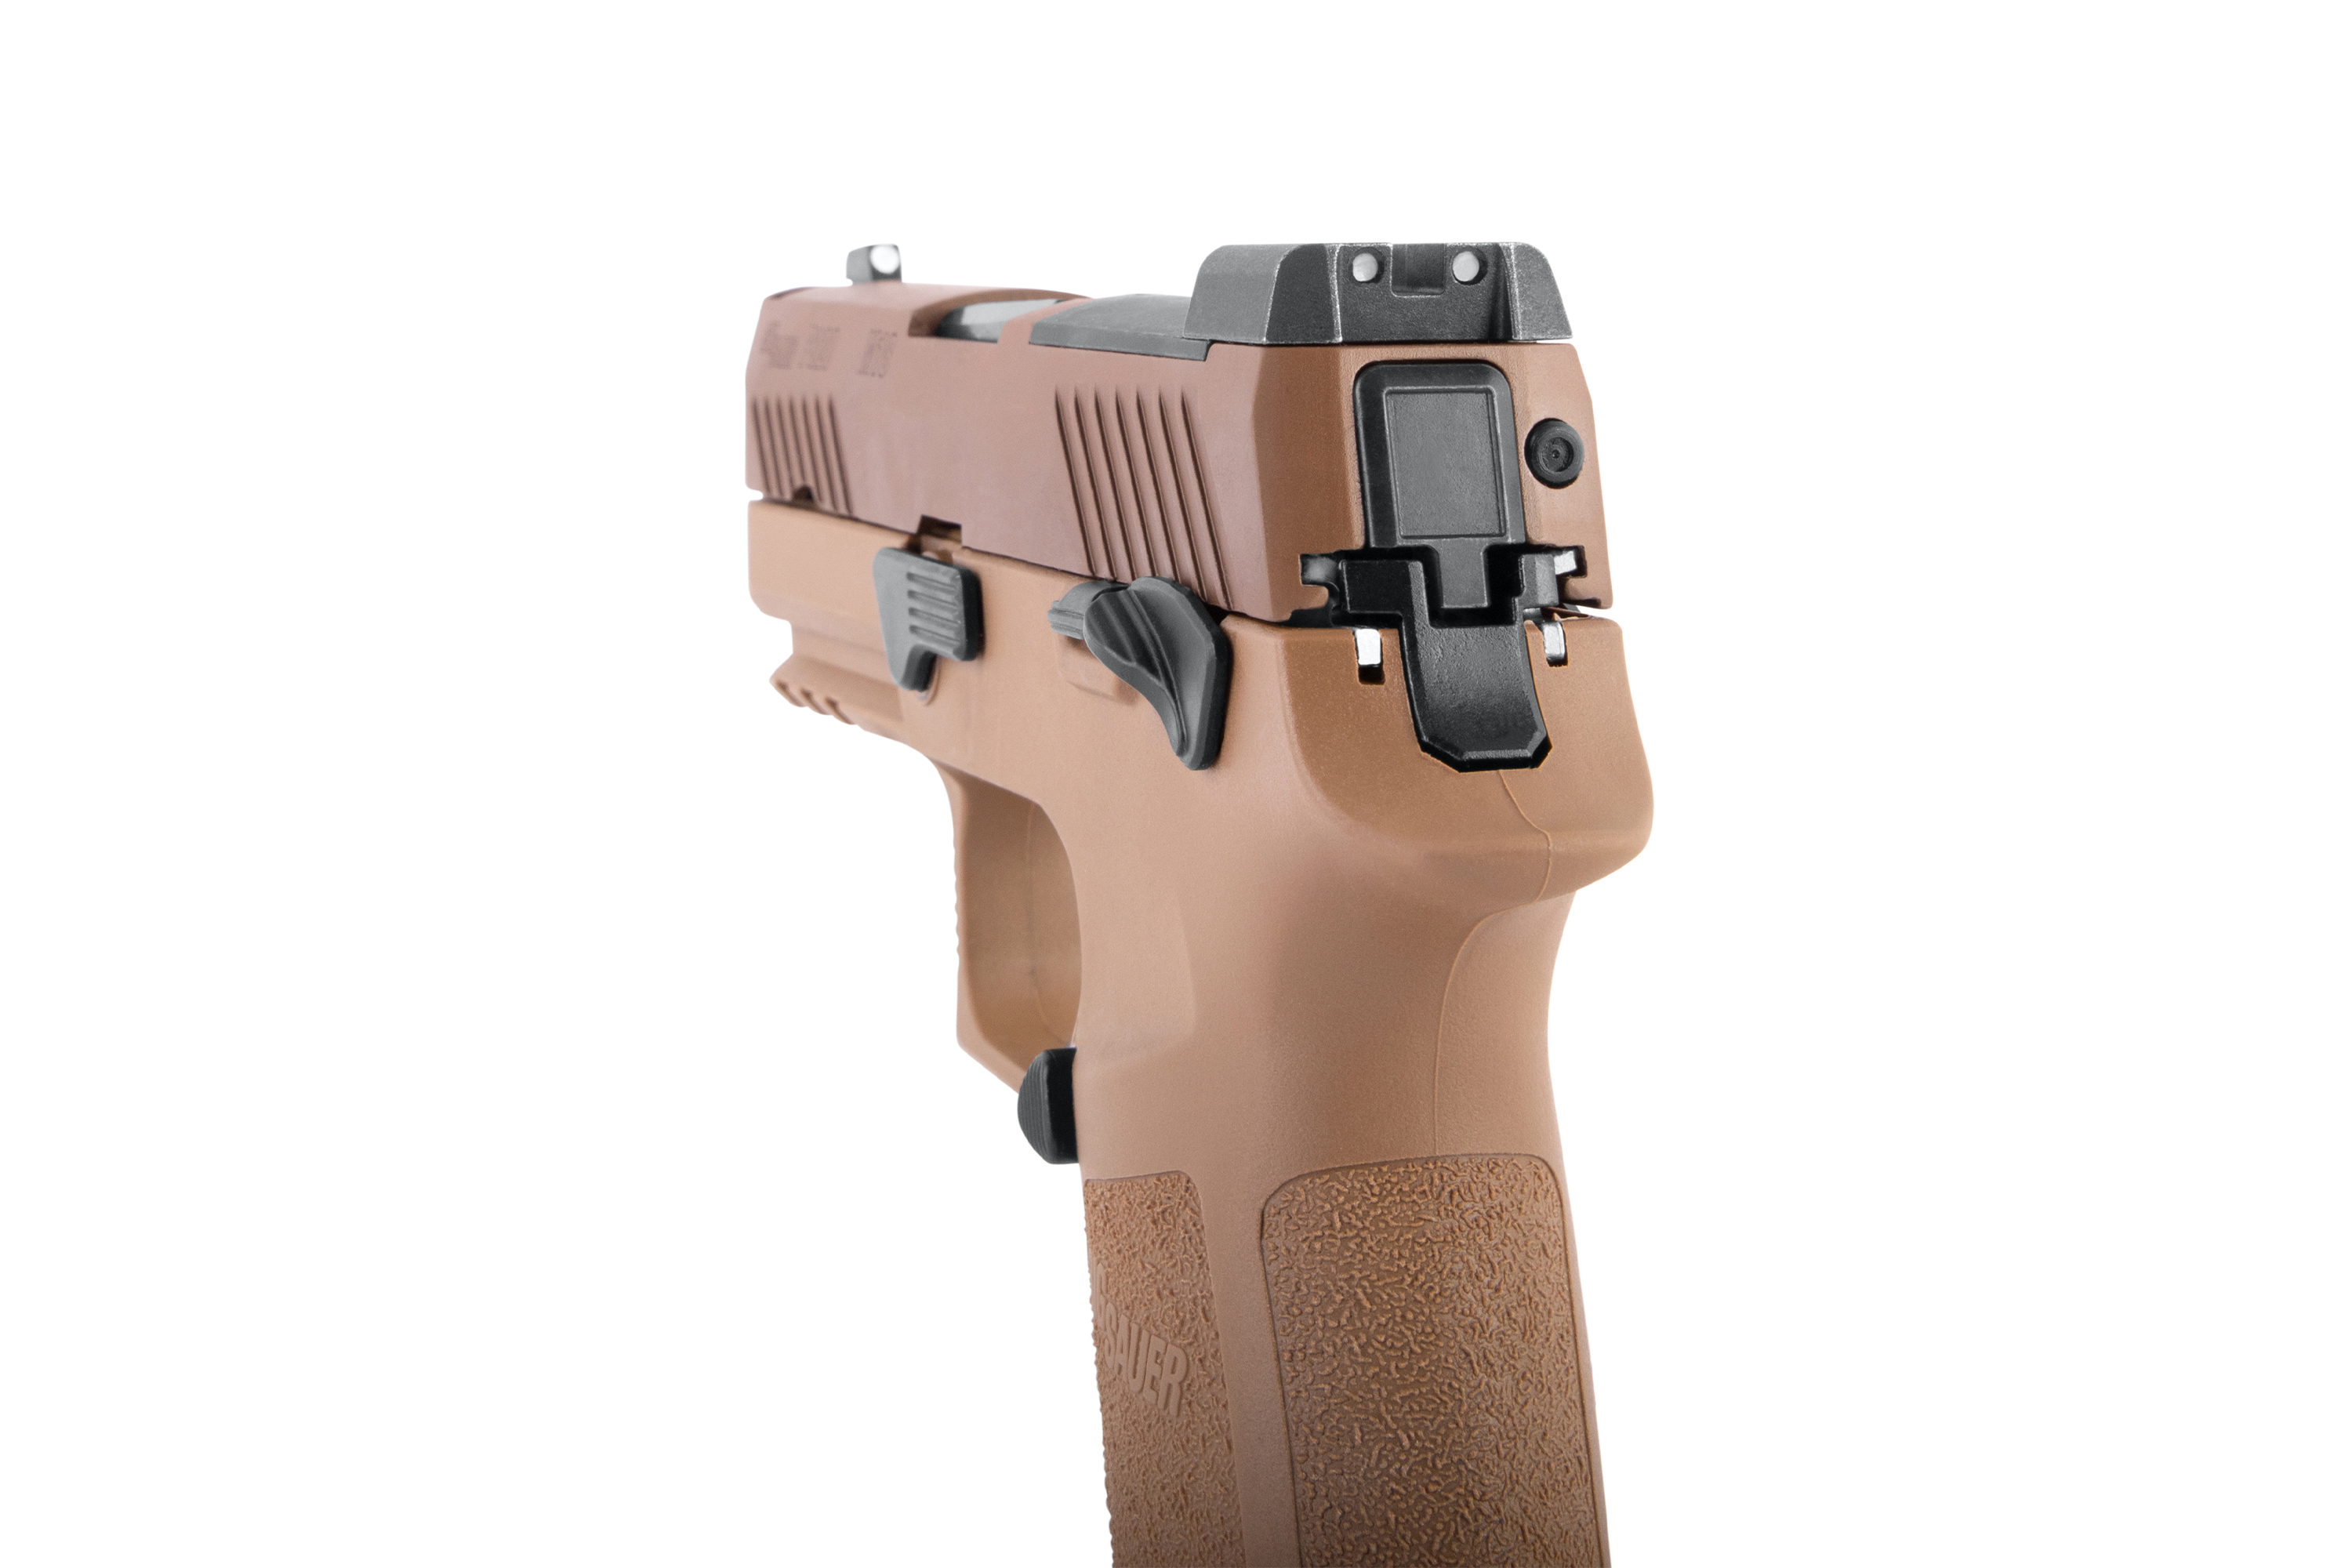 Sig Sauer P320-M18 Coyote Tan 9mm Luger - Selbstladepistole